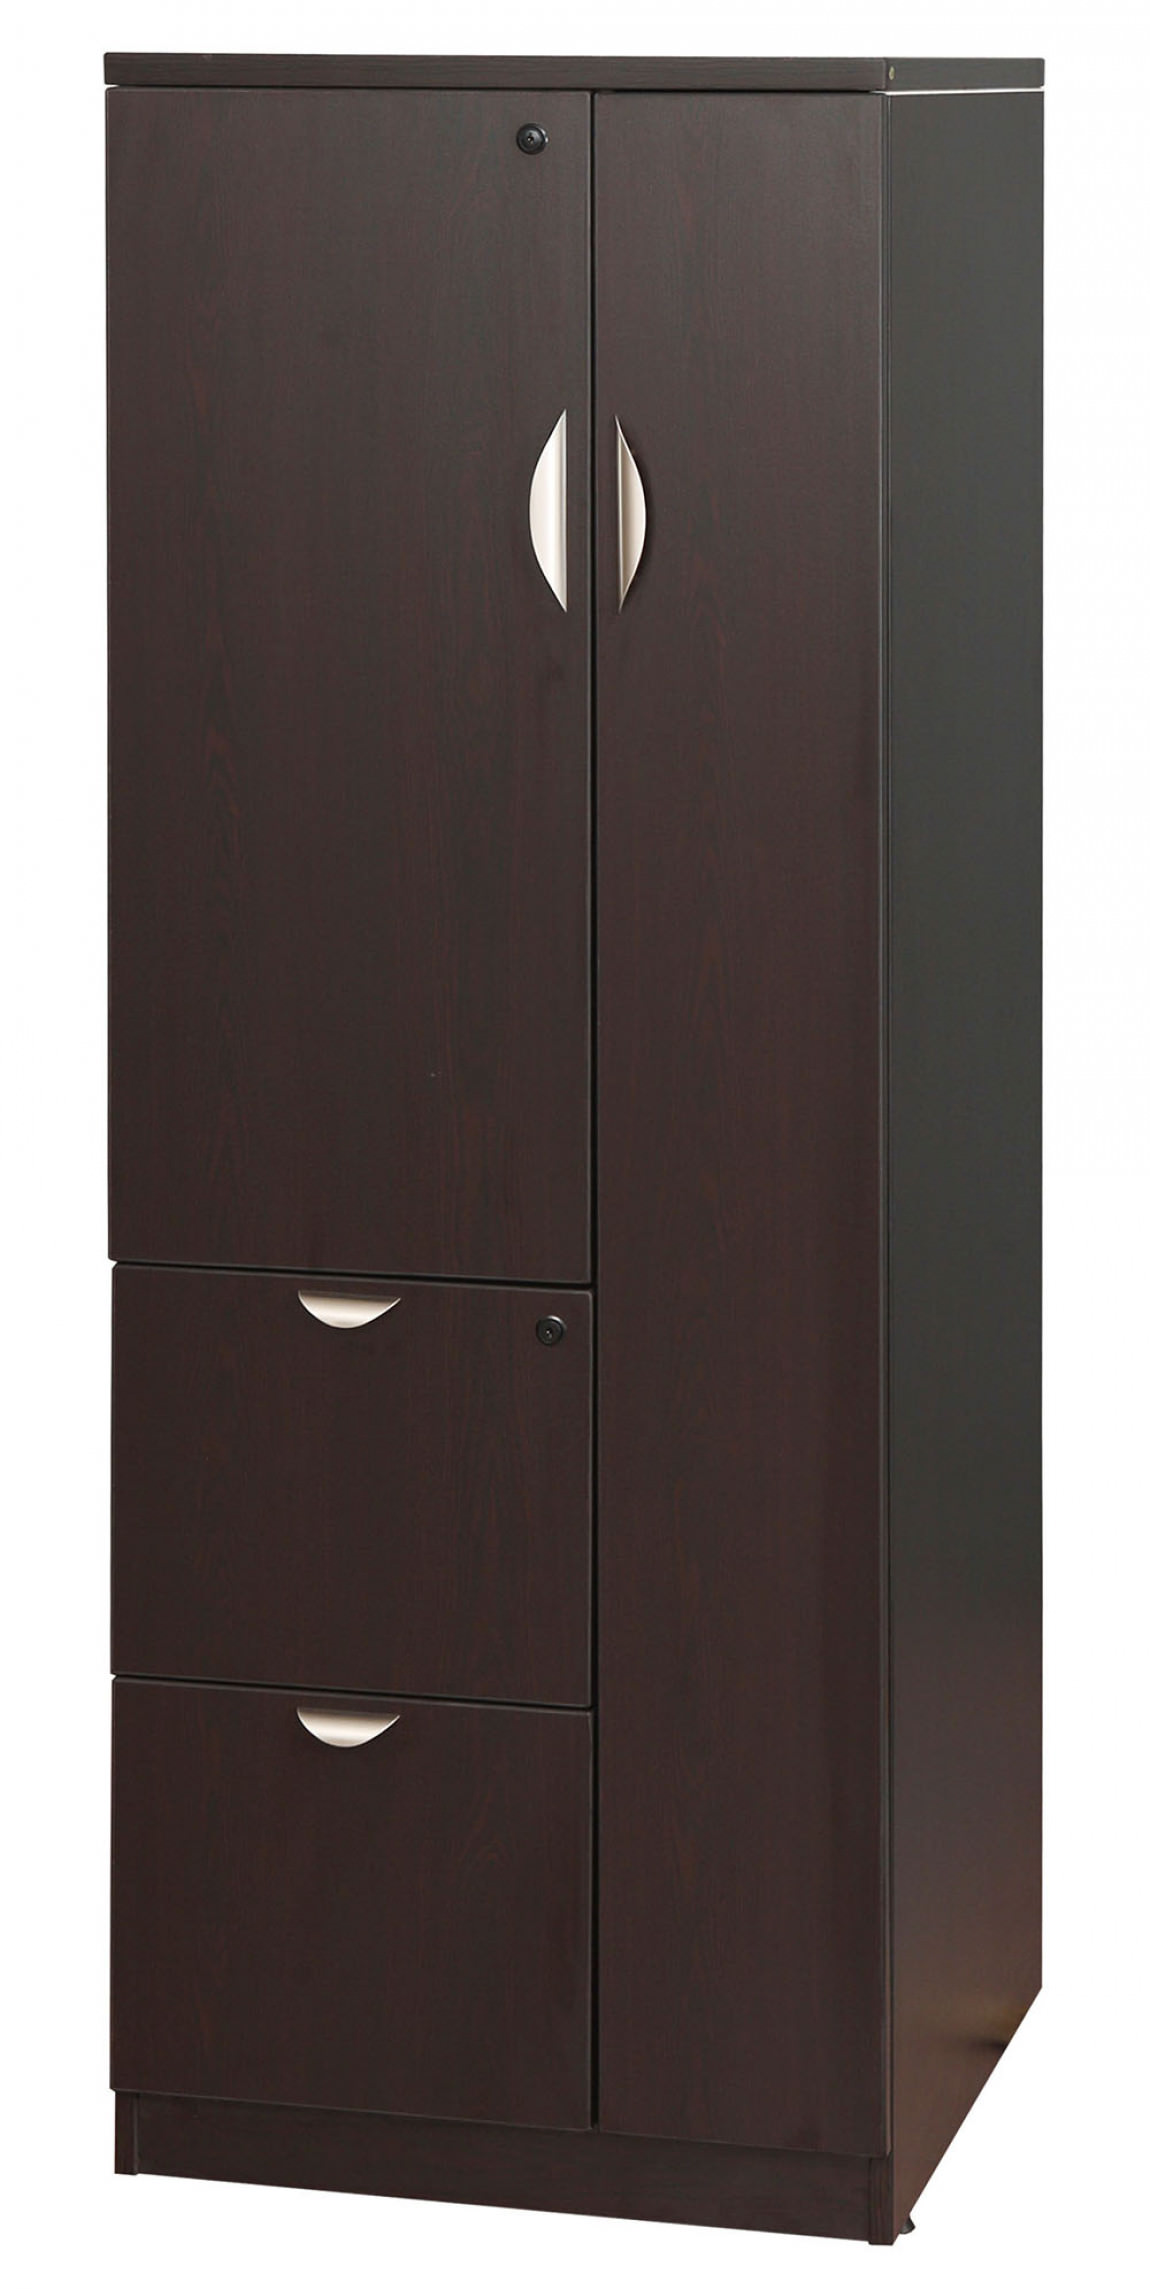 Personal Storage Cabinet with Lock for Office